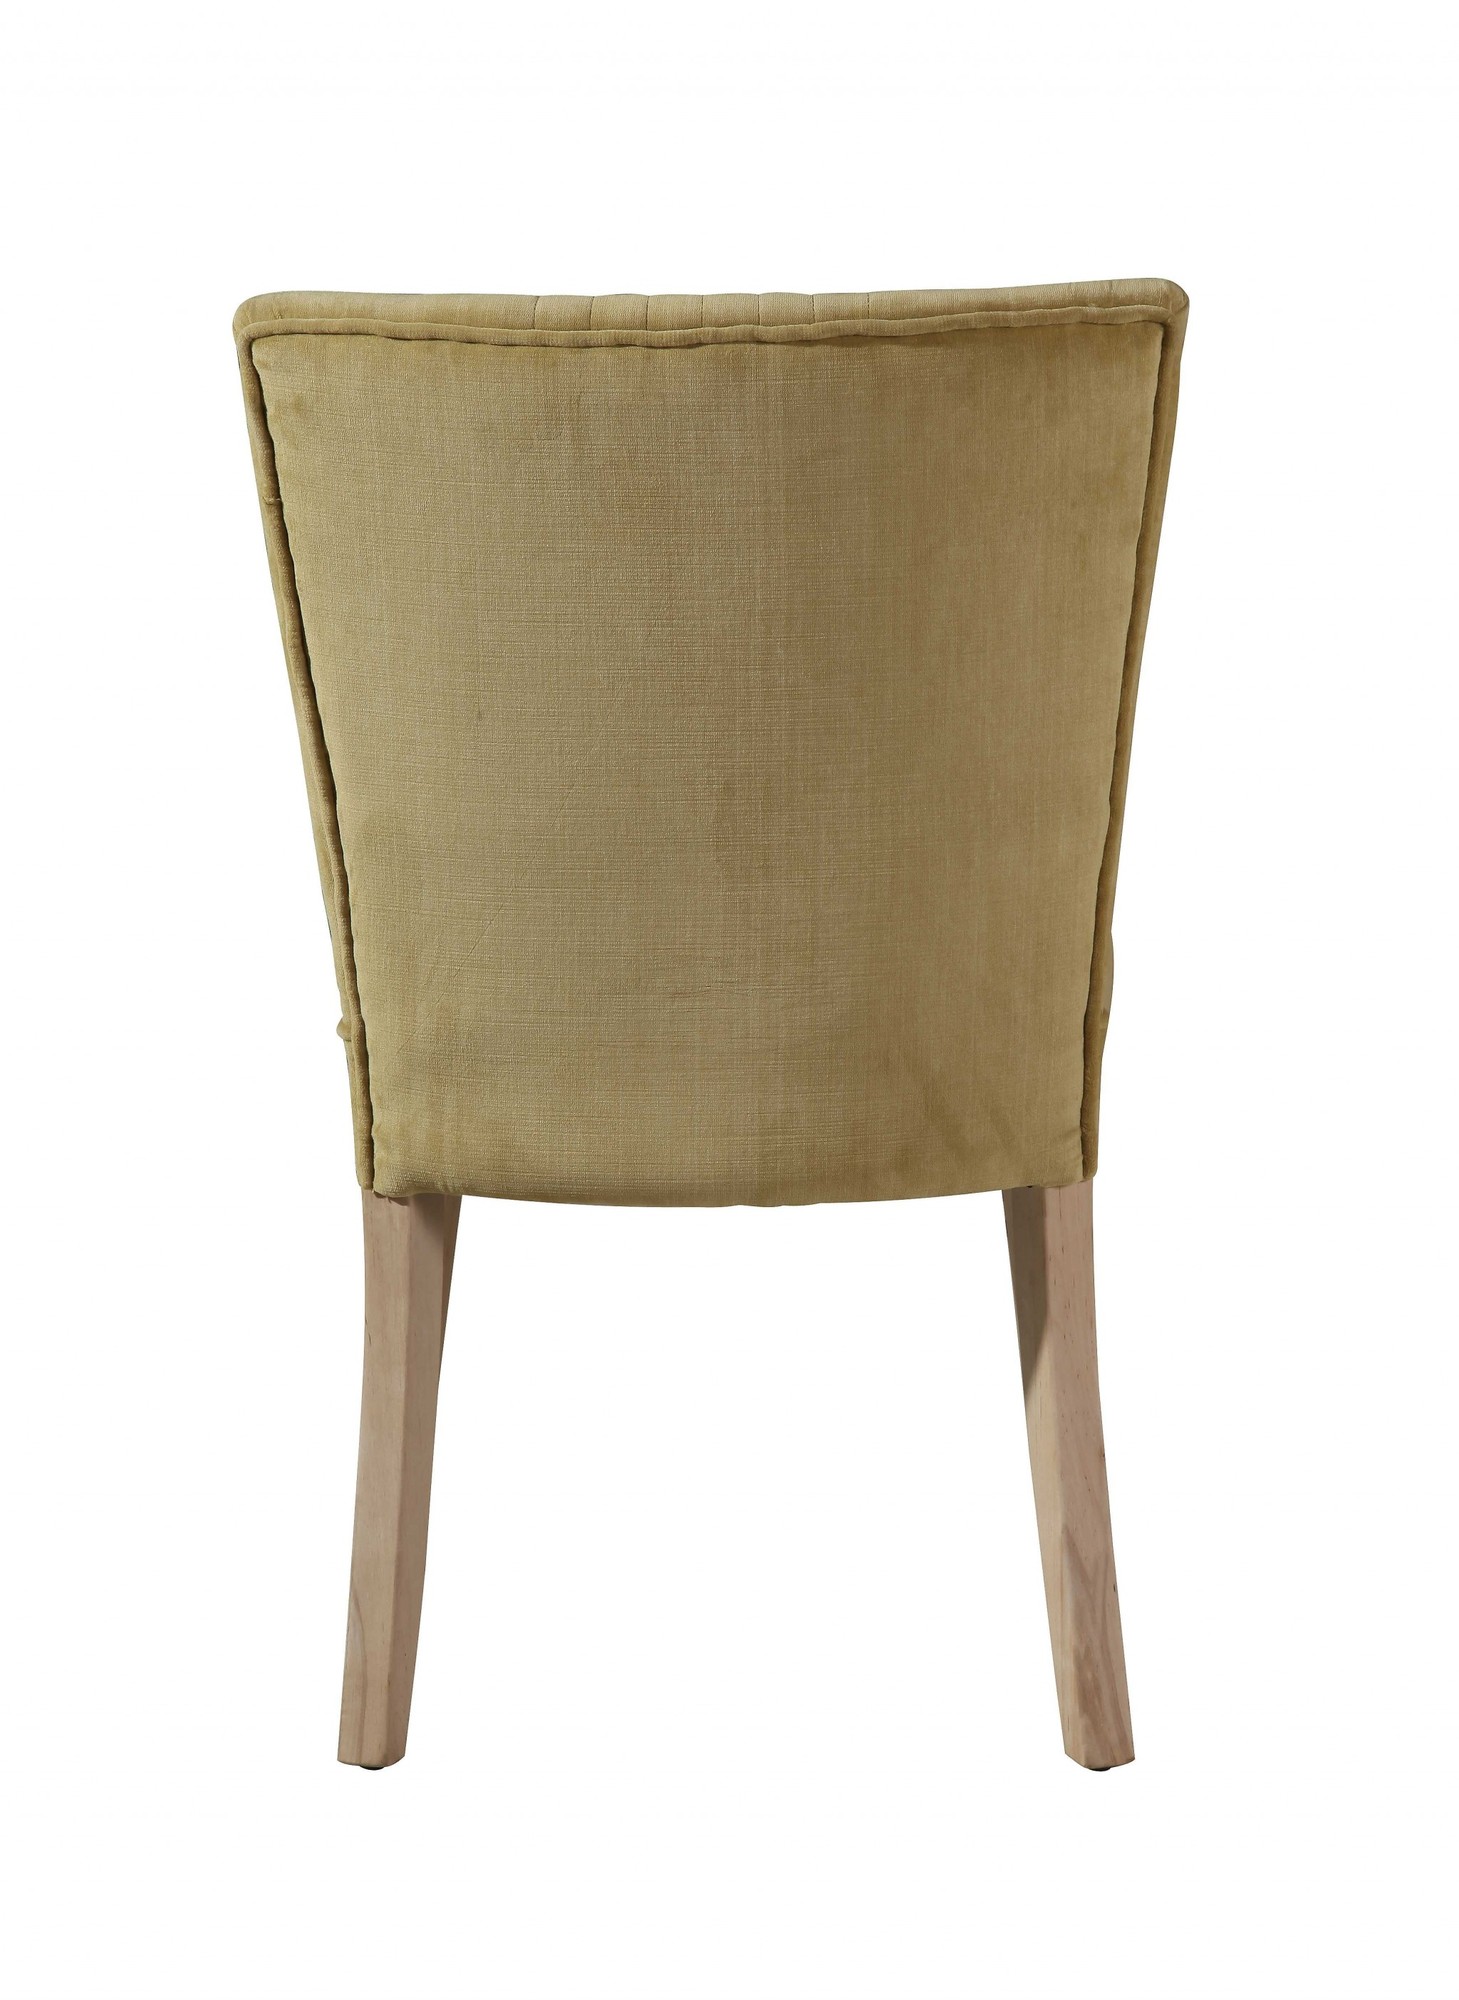 22" X 21" X 34" Yellow Wood Polyester Dining Chair